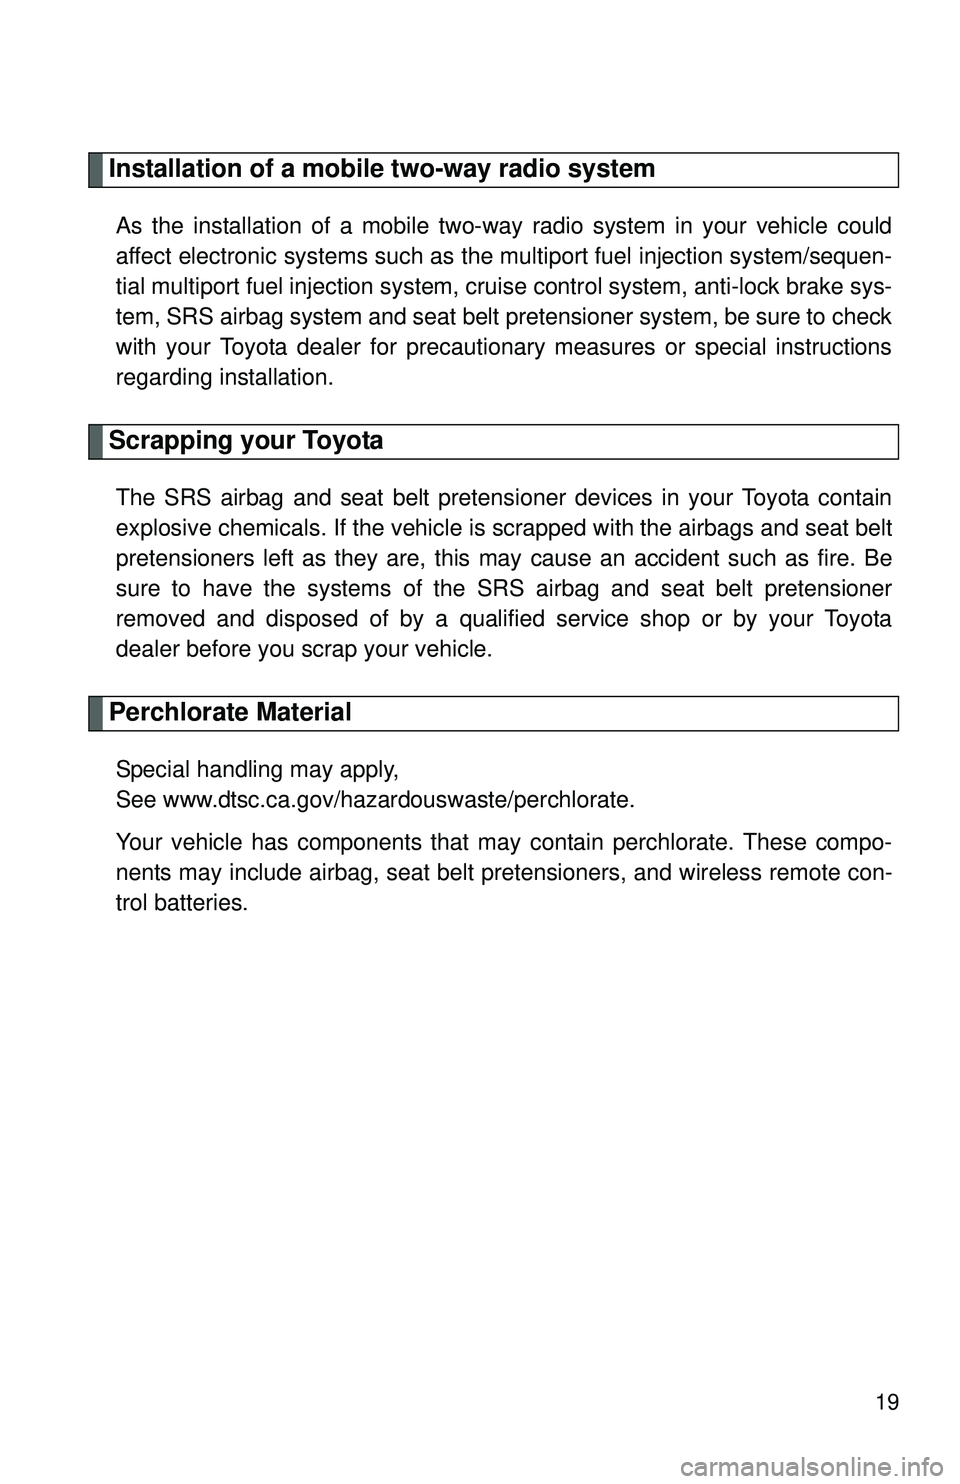 TOYOTA YARIS SEDAN 2011  Owners Manual 19
Installation of a mobile two-way radio system
As the installation of a mobile two-way radio system in your vehicle could
affect electronic systems such as the multiport fuel injection system/sequen